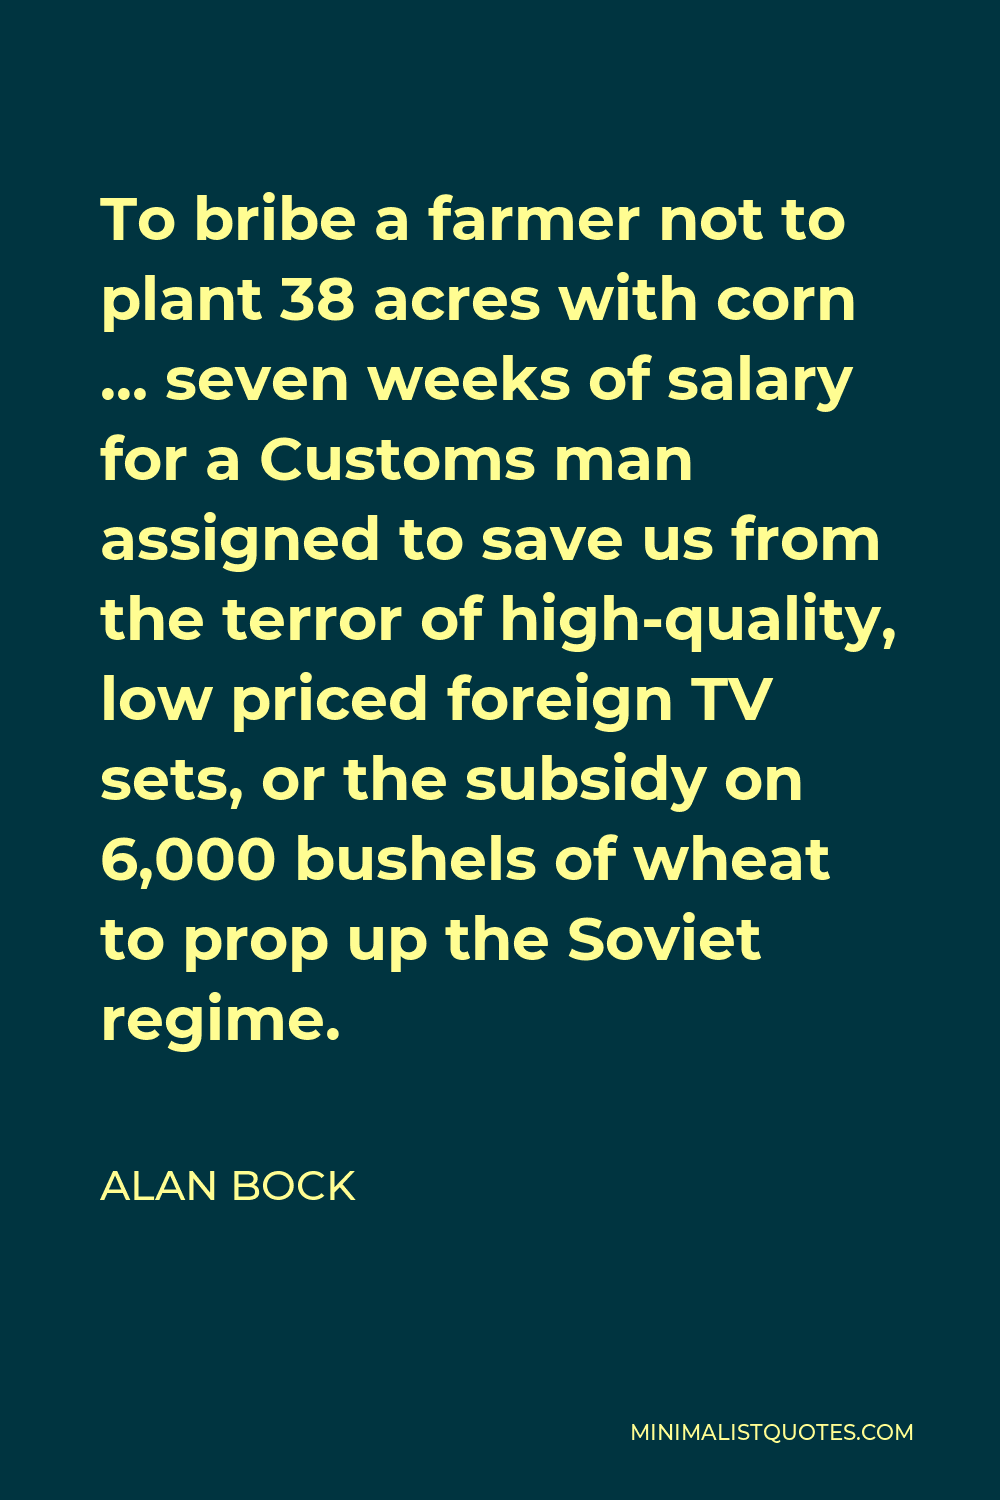 Alan Bock Quote - To bribe a farmer not to plant 38 acres with corn … seven weeks of salary for a Customs man assigned to save us from the terror of high-quality, low priced foreign TV sets, or the subsidy on 6,000 bushels of wheat to prop up the Soviet regime.